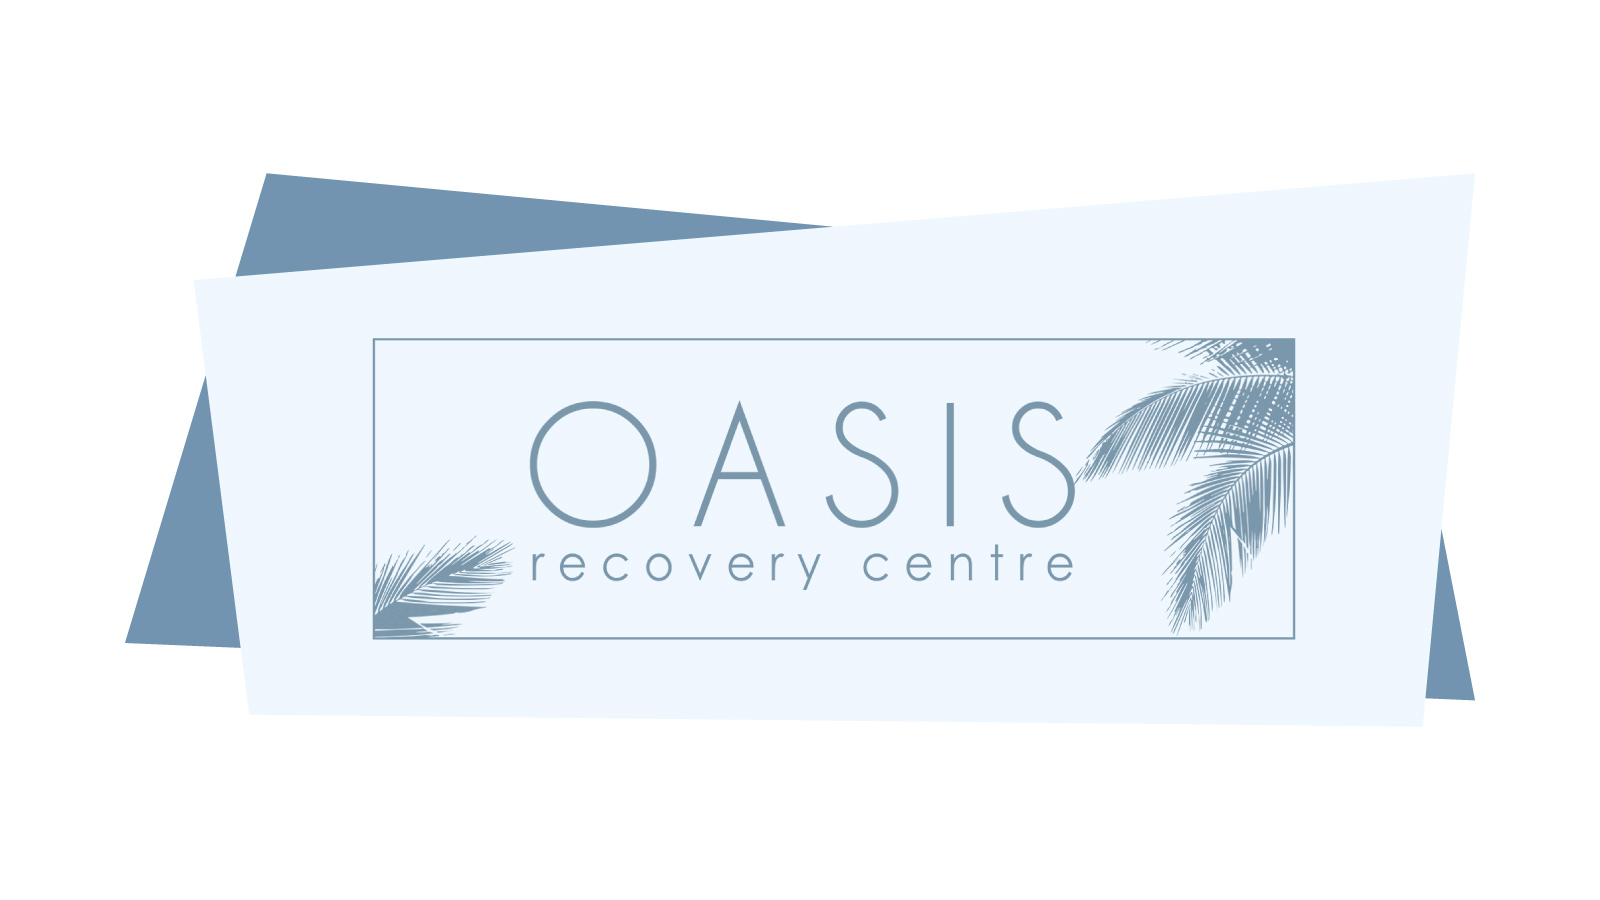 Oasis recovery centre